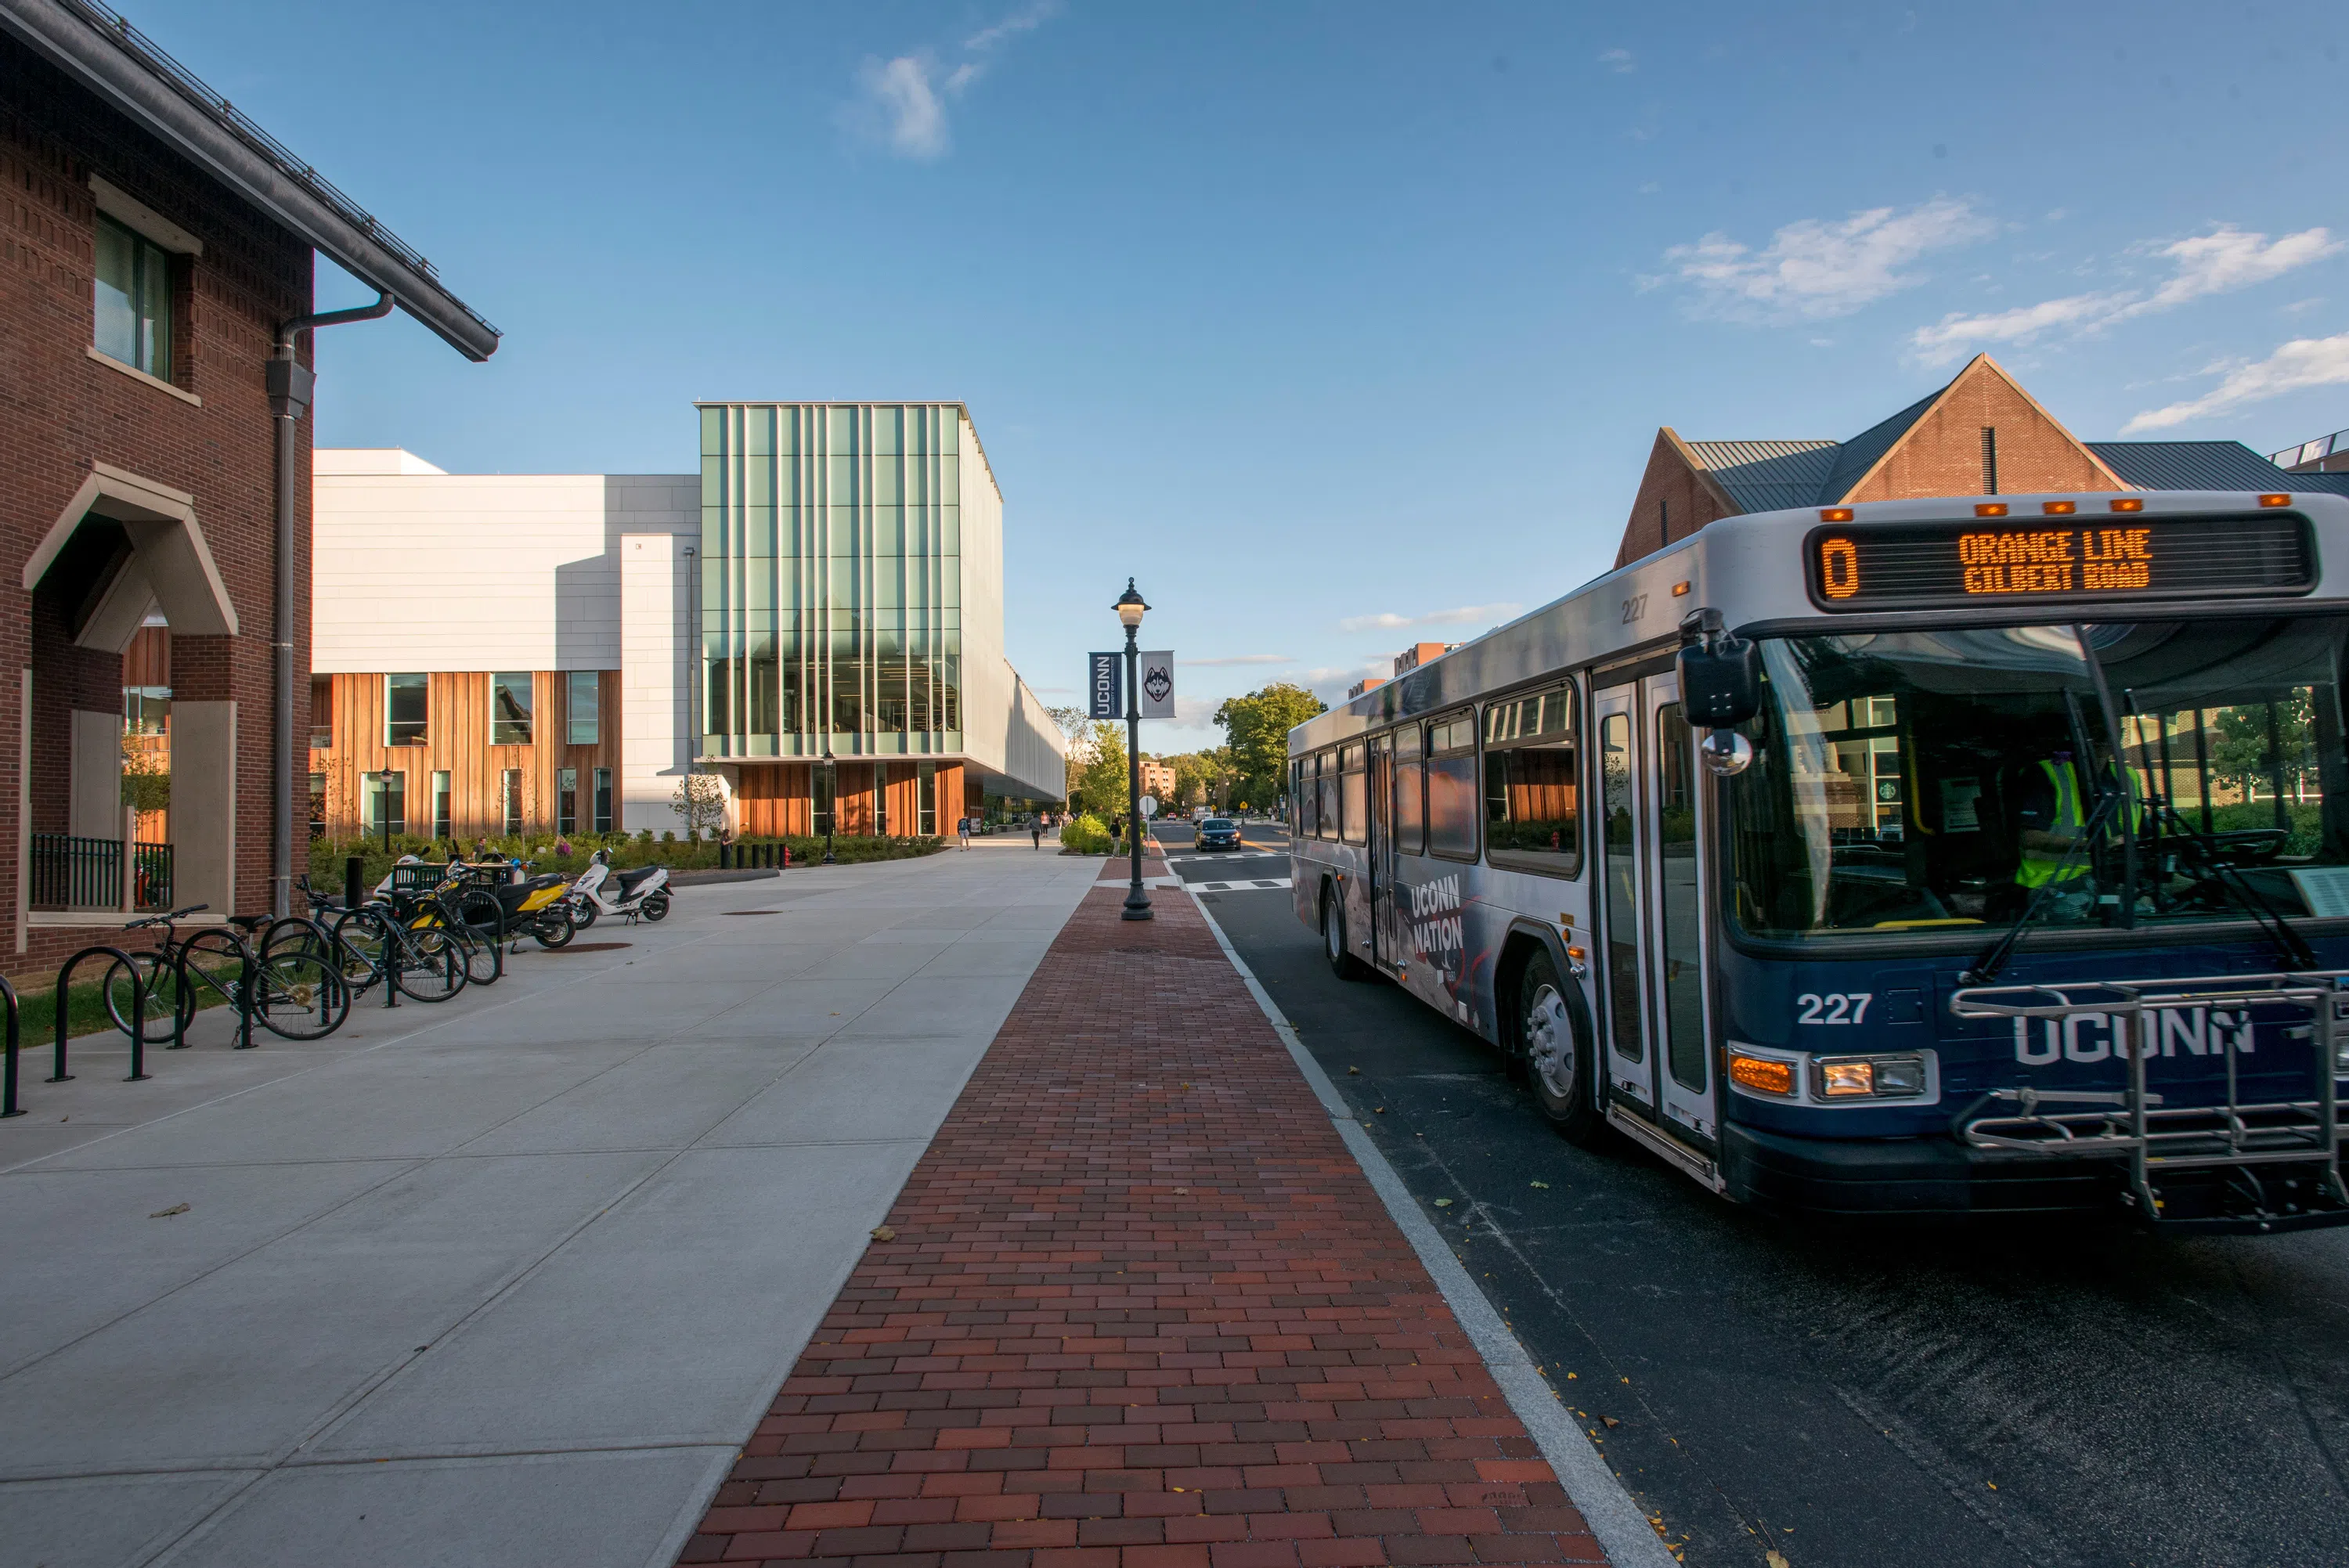 Images of the exterior and interior of UConn's Student Recreation Center